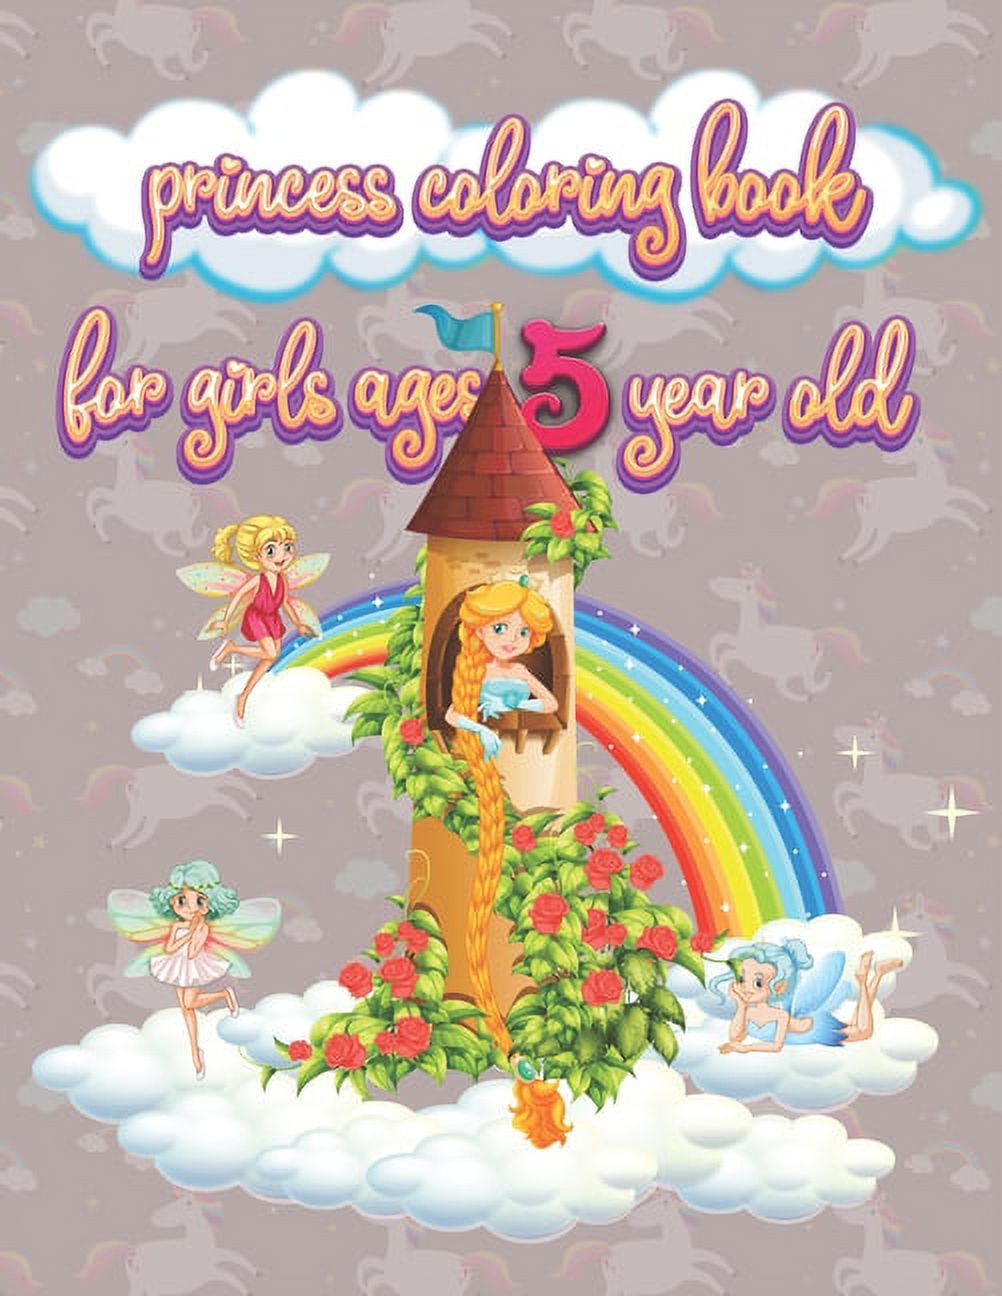 princess coloring book book for girls ages 5 year old : Cute Princess Coloring Book for girls, Princess Coloring Activity Book for Toddlers, gift For Little Girls Who Love Princesses (Paperback) - image 1 of 1